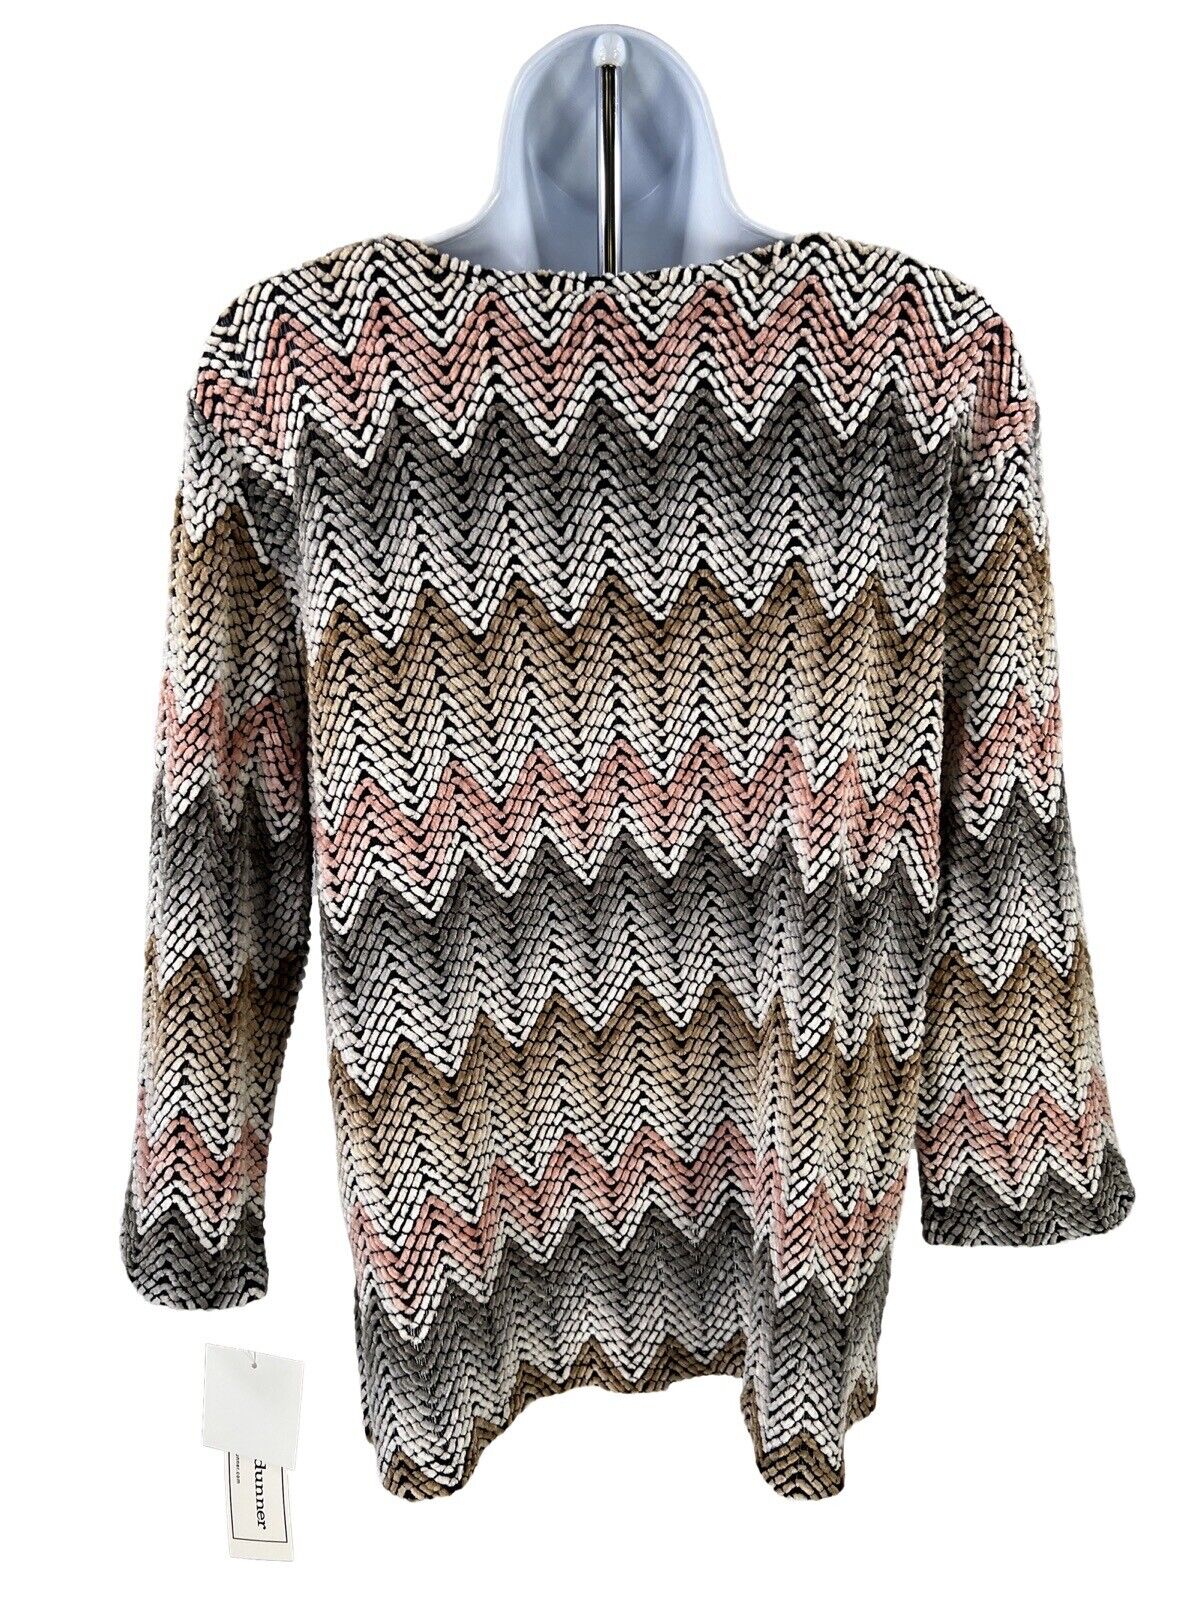 NEW Alfred Dunner Women's Multi-Color Striped V-Neck Sweater - M